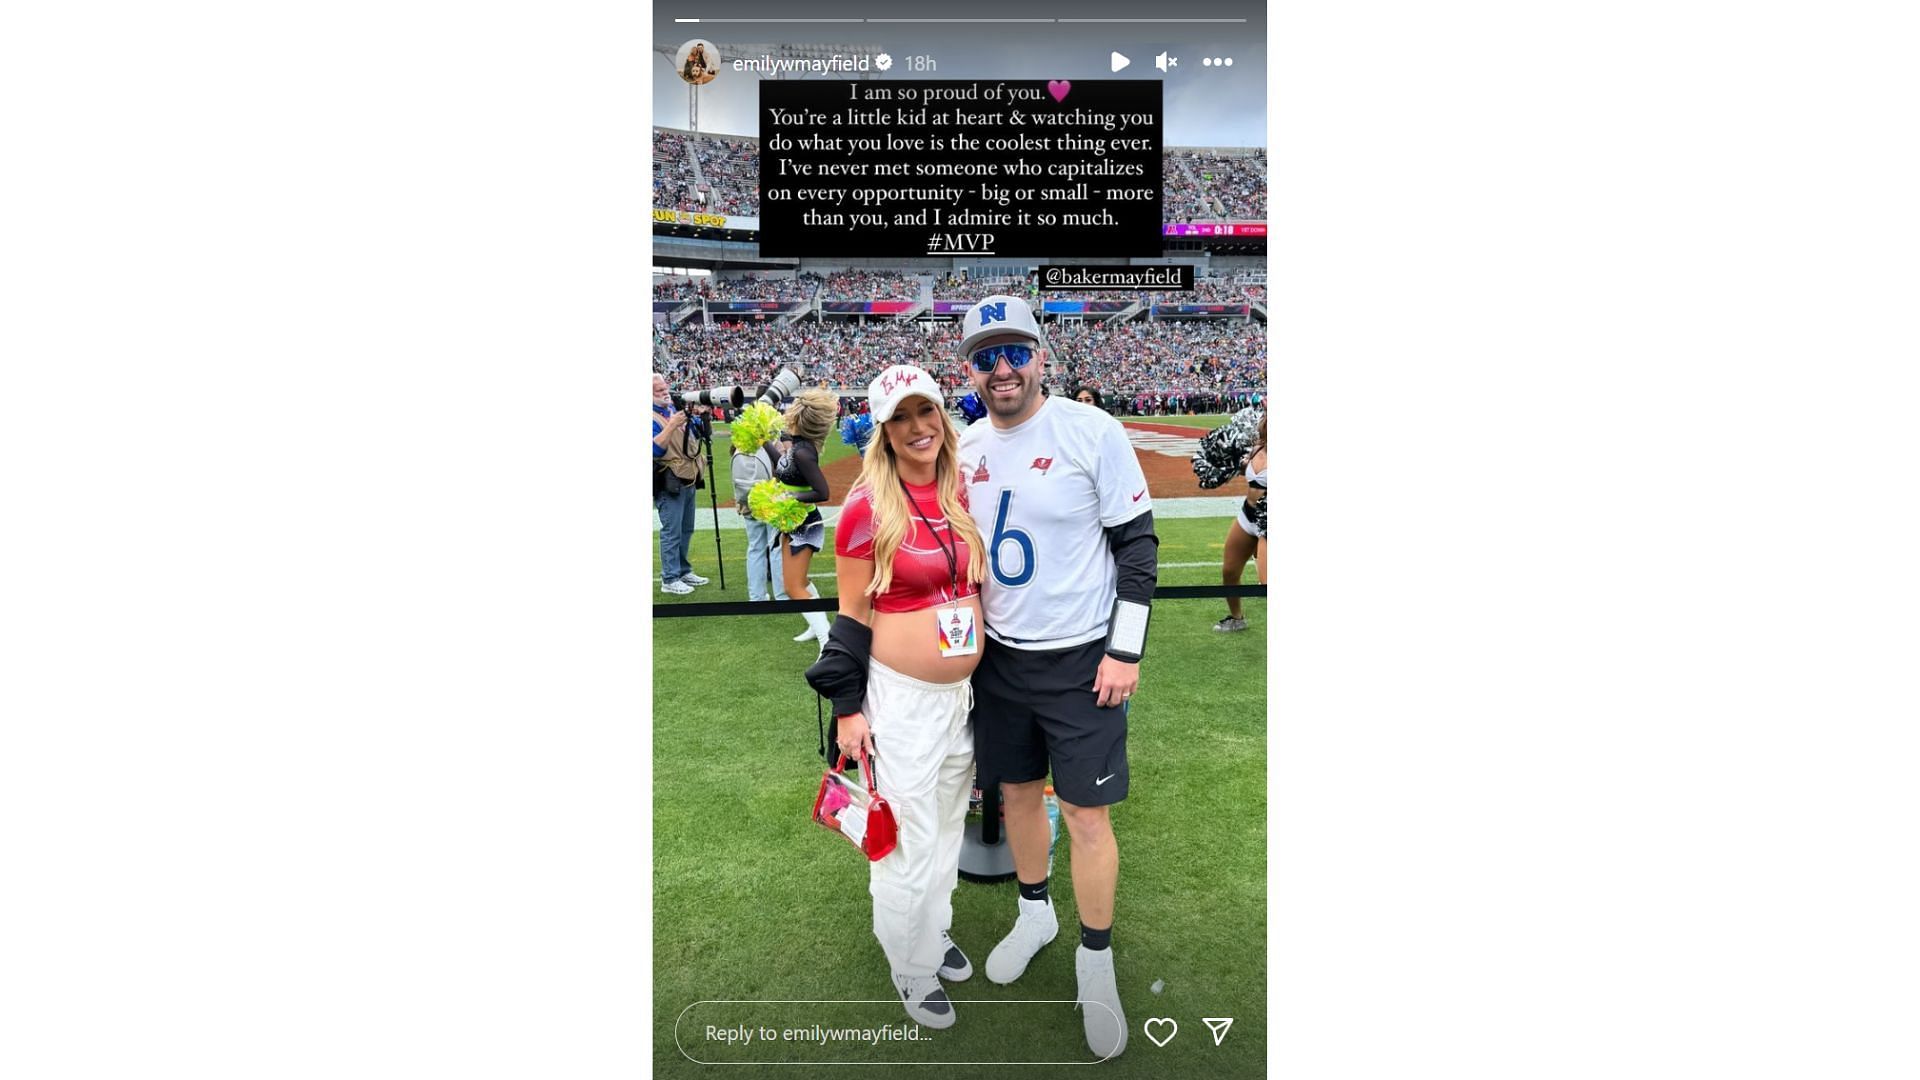 Baker Mayfield&#039;s wife Emily shares Pro Bowl snap on Instagram (Credit: @emilywmayfield)